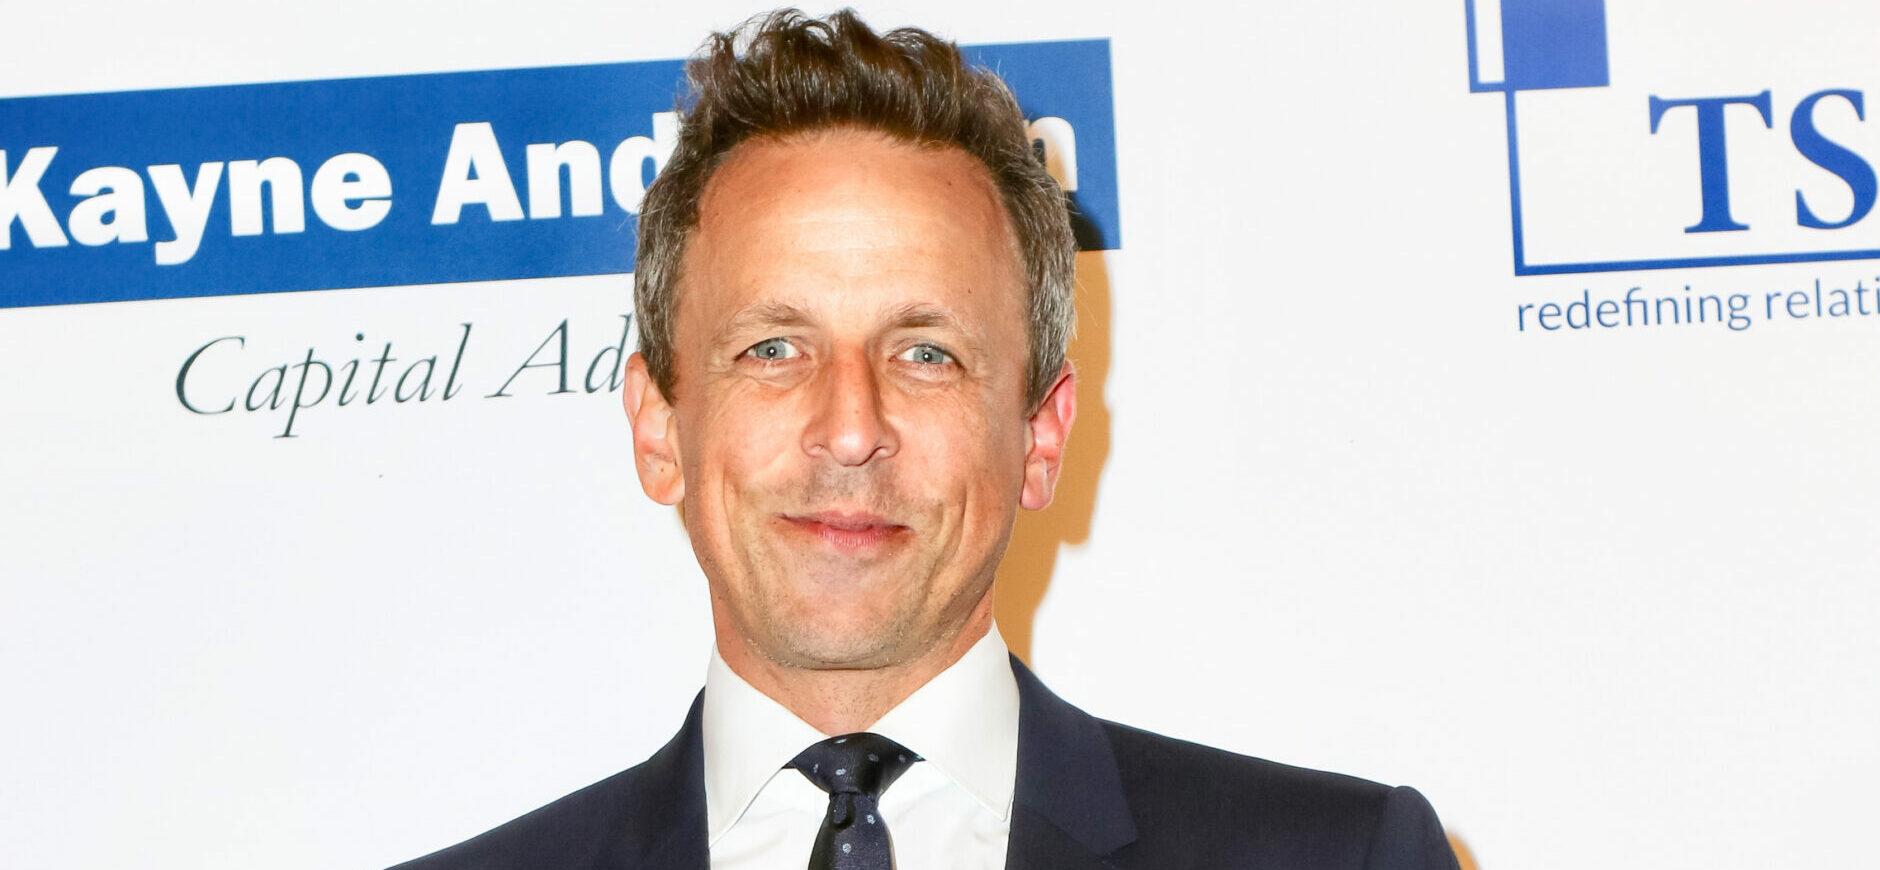 Seth Meyers Tests Positive For COVID-19, Cancels ‘Late Night’ Shows